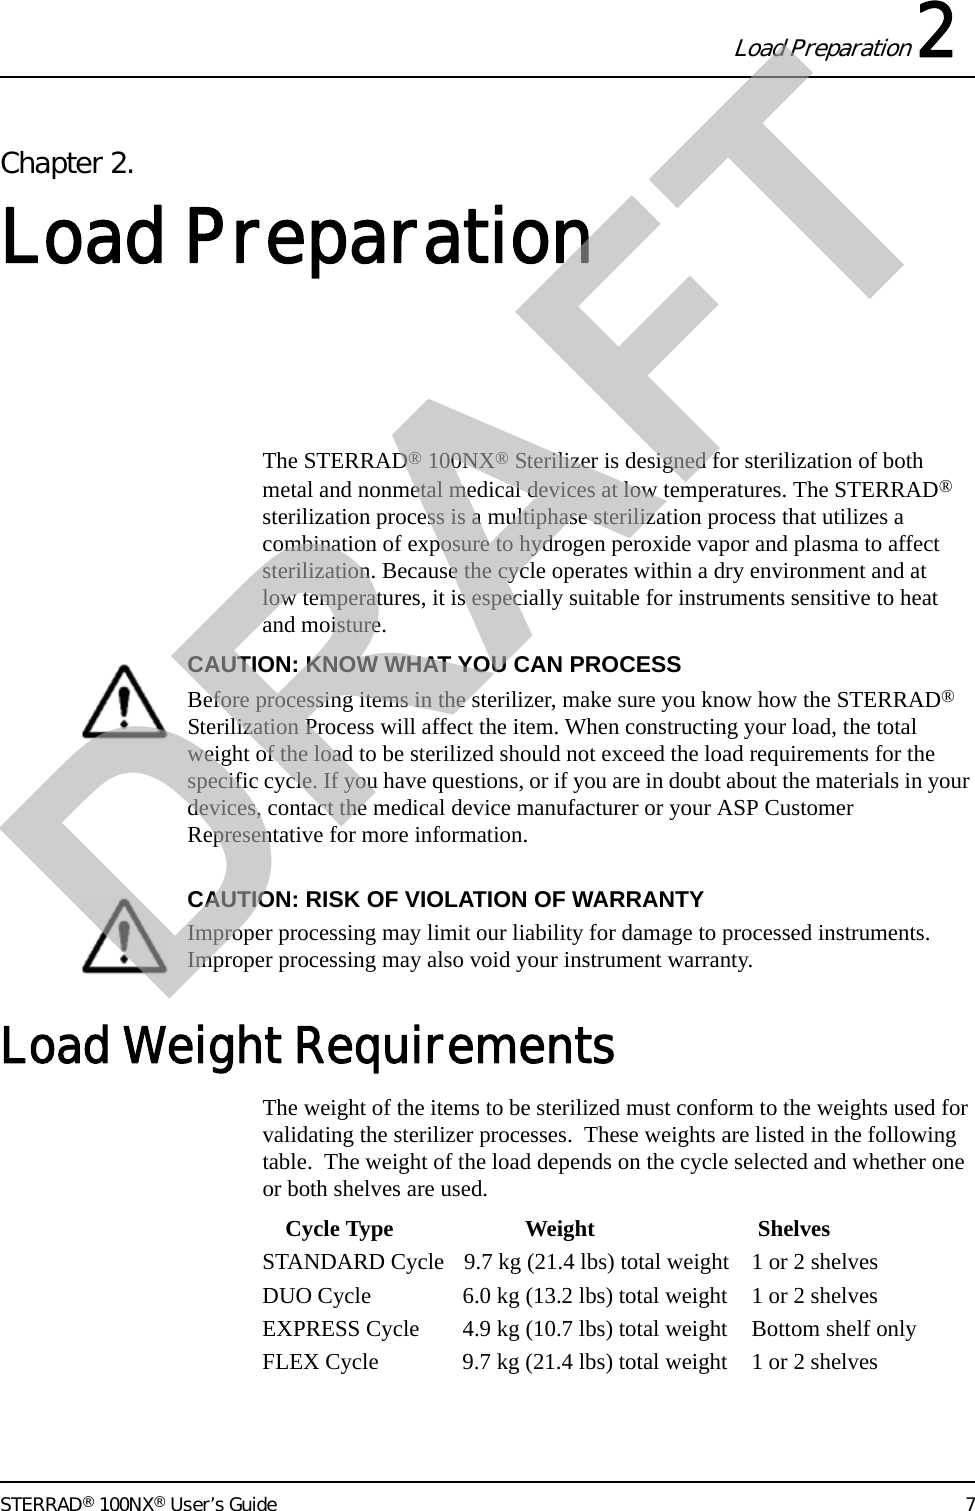 Load Preparation 2STERRAD® 100NX® User’s Guide 7Chapter 2.Load PreparationThe STERRAD® 100NX® Sterilizer is designed for sterilization of both metal and nonmetal medical devices at low temperatures. The STERRAD® sterilization process is a multiphase sterilization process that utilizes a combination of exposure to hydrogen peroxide vapor and plasma to affect sterilization. Because the cycle operates within a dry environment and at low temperatures, it is especially suitable for instruments sensitive to heat and moisture. CAUTION: KNOW WHAT YOU CAN PROCESSBefore processing items in the sterilizer, make sure you know how the STERRAD® Sterilization Process will affect the item. When constructing your load, the total weight of the load to be sterilized should not exceed the load requirements for the specific cycle. If you have questions, or if you are in doubt about the materials in your devices, contact the medical device manufacturer or your ASP Customer Representative for more information. CAUTION: RISK OF VIOLATION OF WARRANTYImproper processing may limit our liability for damage to processed instruments. Improper processing may also void your instrument warranty.Load Weight RequirementsThe weight of the items to be sterilized must conform to the weights used for validating the sterilizer processes.  These weights are listed in the following table.  The weight of the load depends on the cycle selected and whether one or both shelves are used.    Cycle Type Weight ShelvesSTANDARD Cycle 9.7 kg (21.4 lbs) total weight 1 or 2 shelvesDUO Cycle 6.0 kg (13.2 lbs) total weight 1 or 2 shelvesEXPRESS Cycle 4.9 kg (10.7 lbs) total weight Bottom shelf onlyFLEX Cycle 9.7 kg (21.4 lbs) total weight 1 or 2 shelvesDRAFT